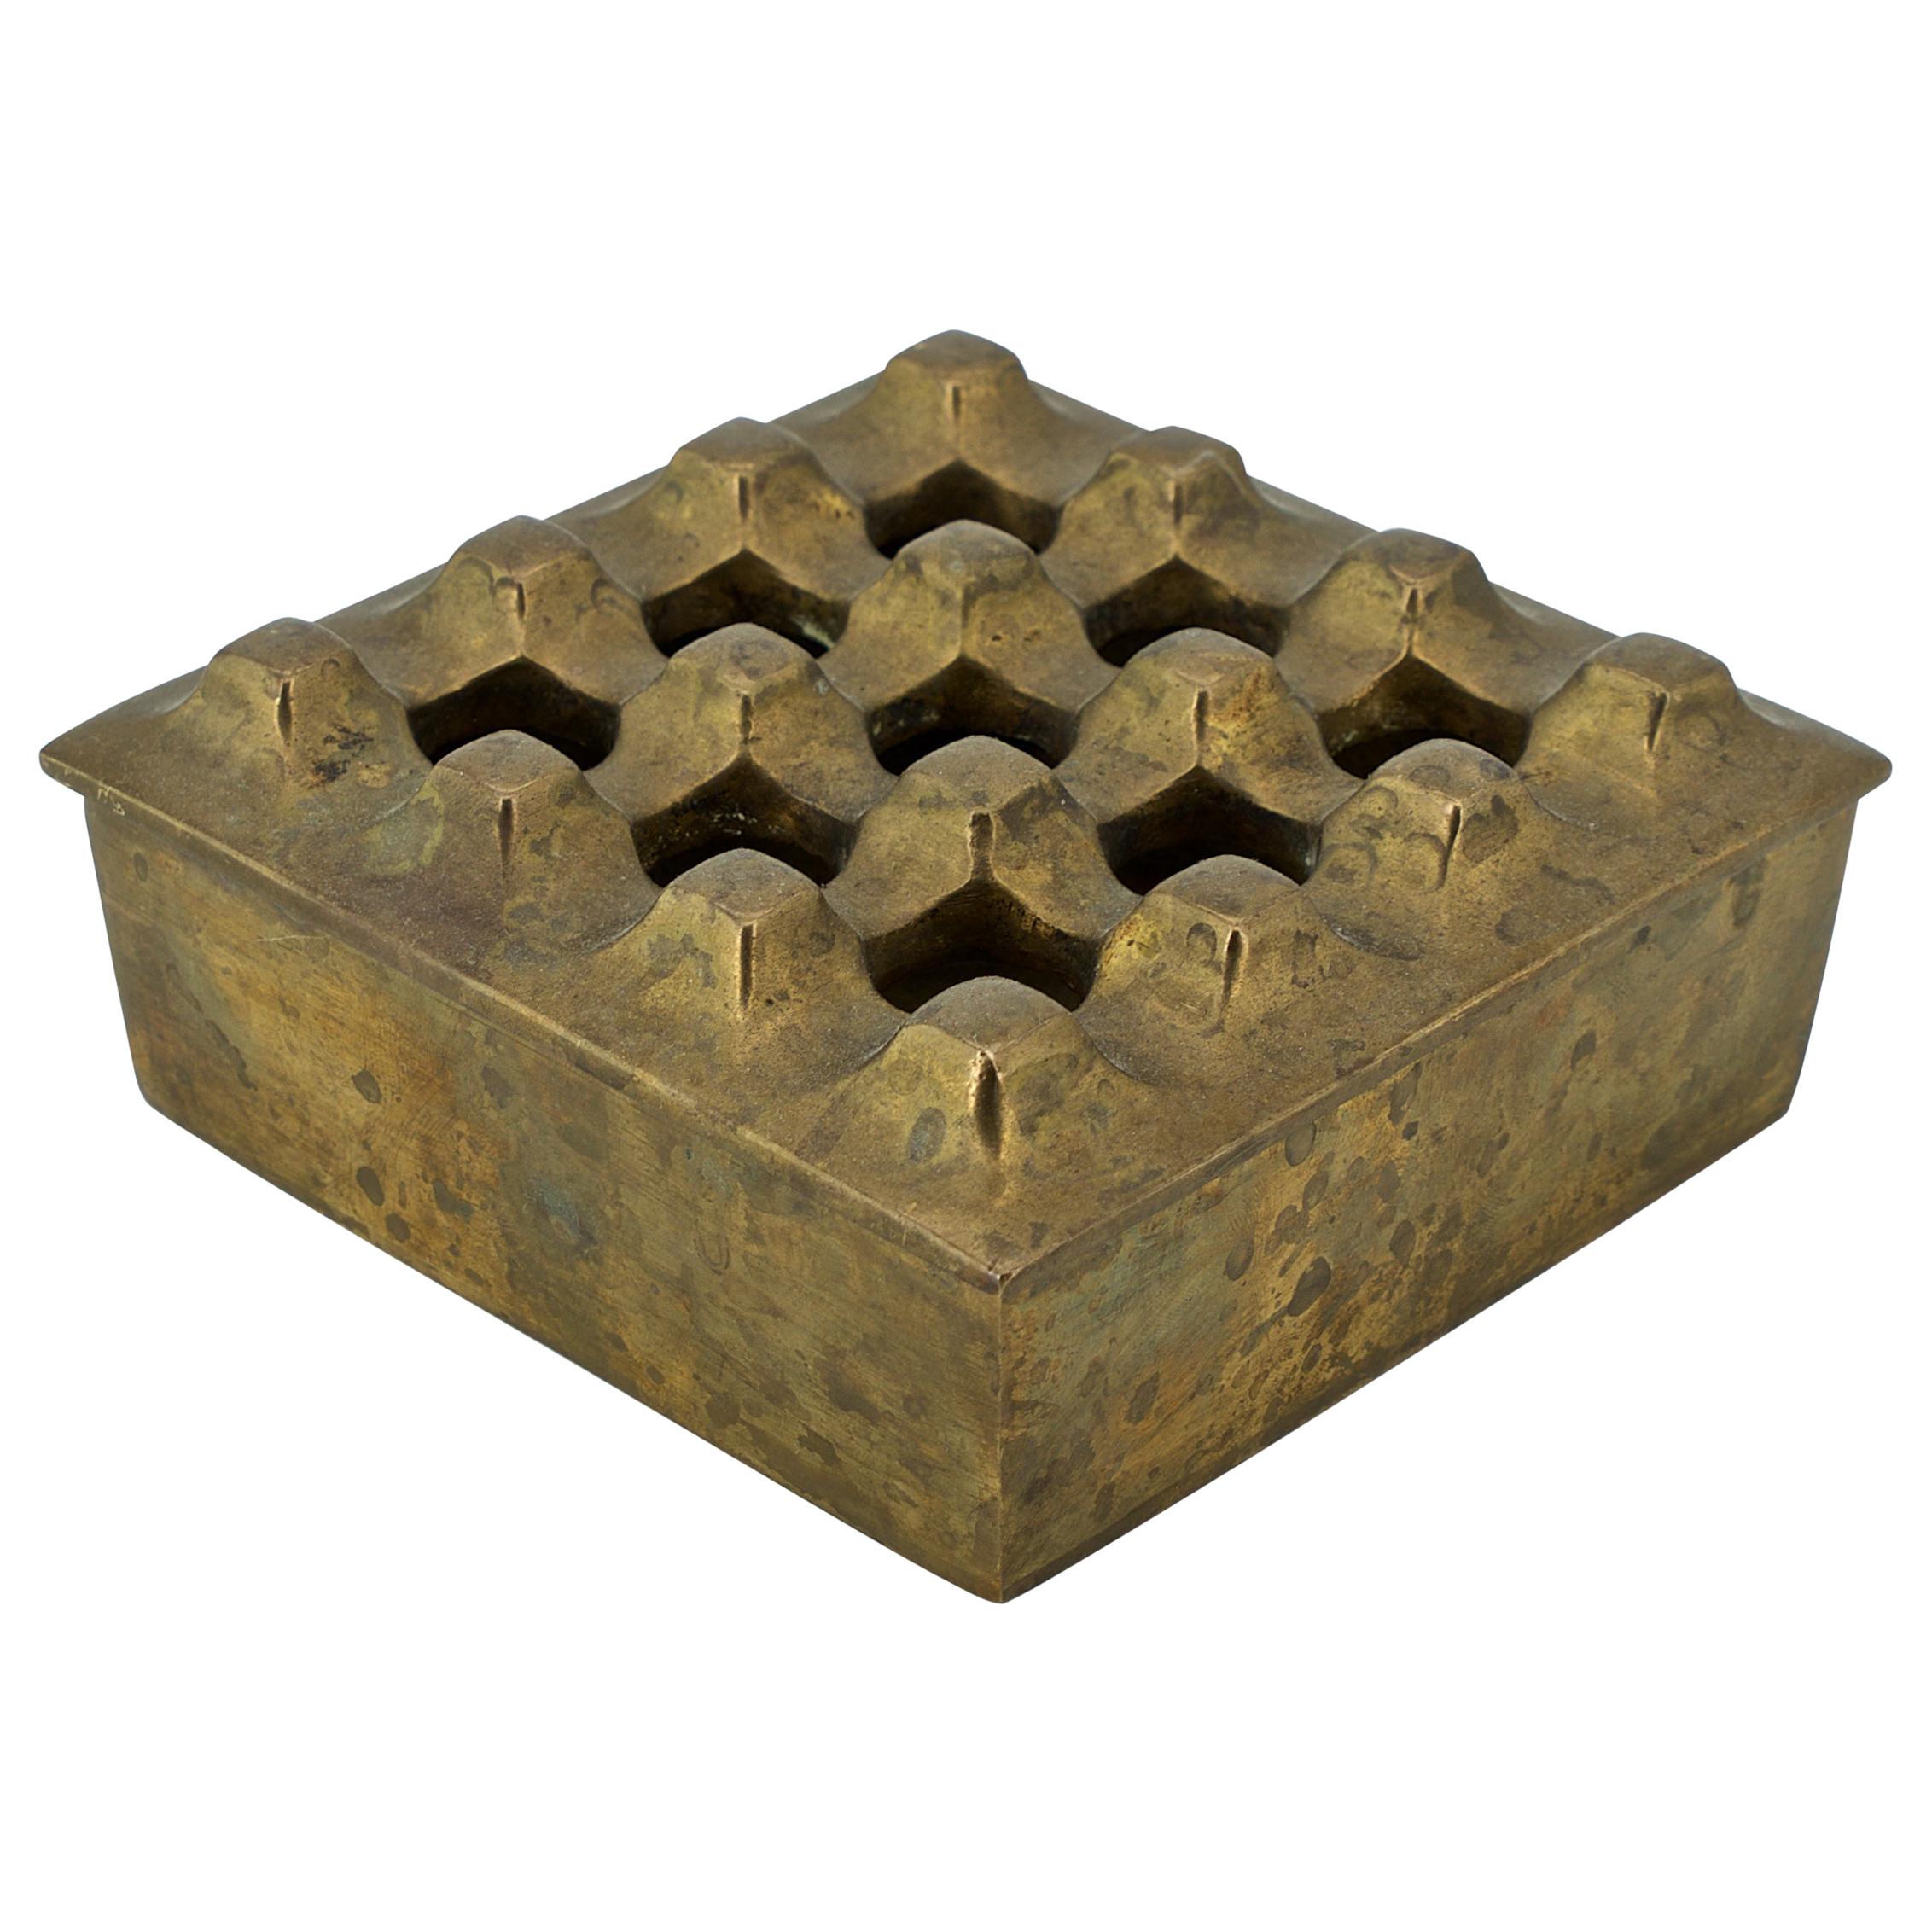 Modernist Architectural Brass Table Cigar Box Ashtray Cabinmodern Egg Crate